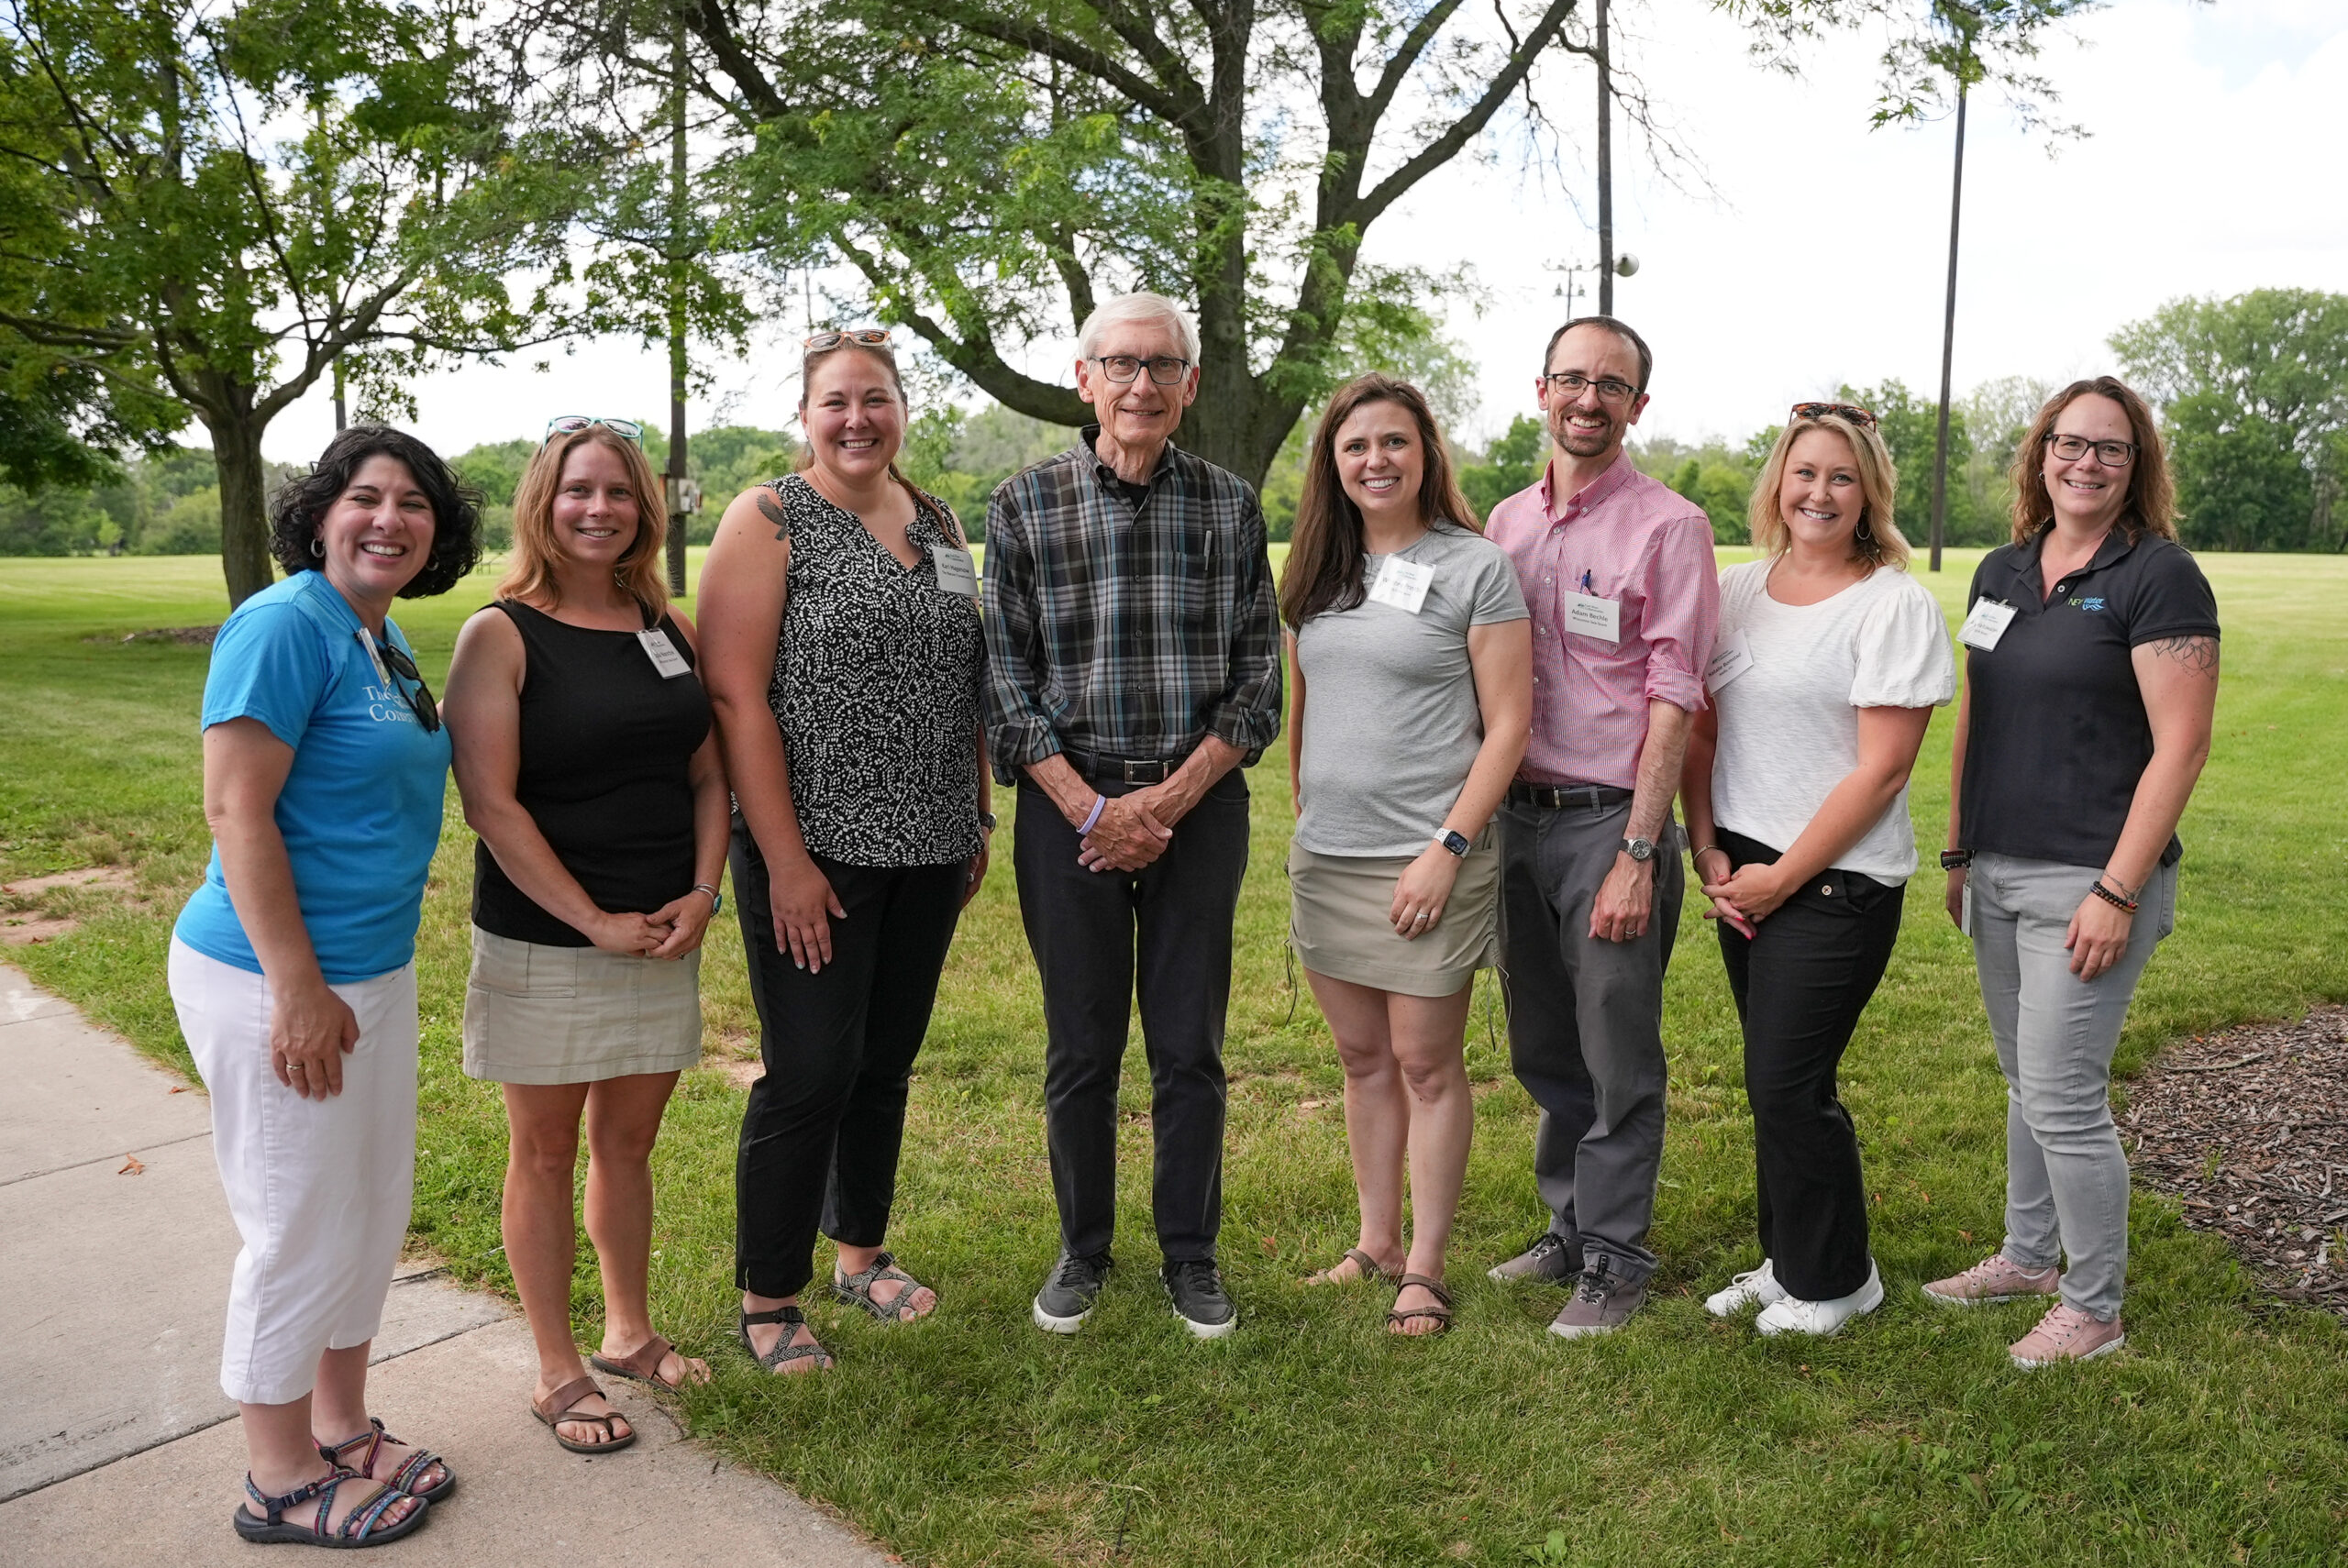 Six people of the East River Collaborative project time pose for a photo with Tony Evers.